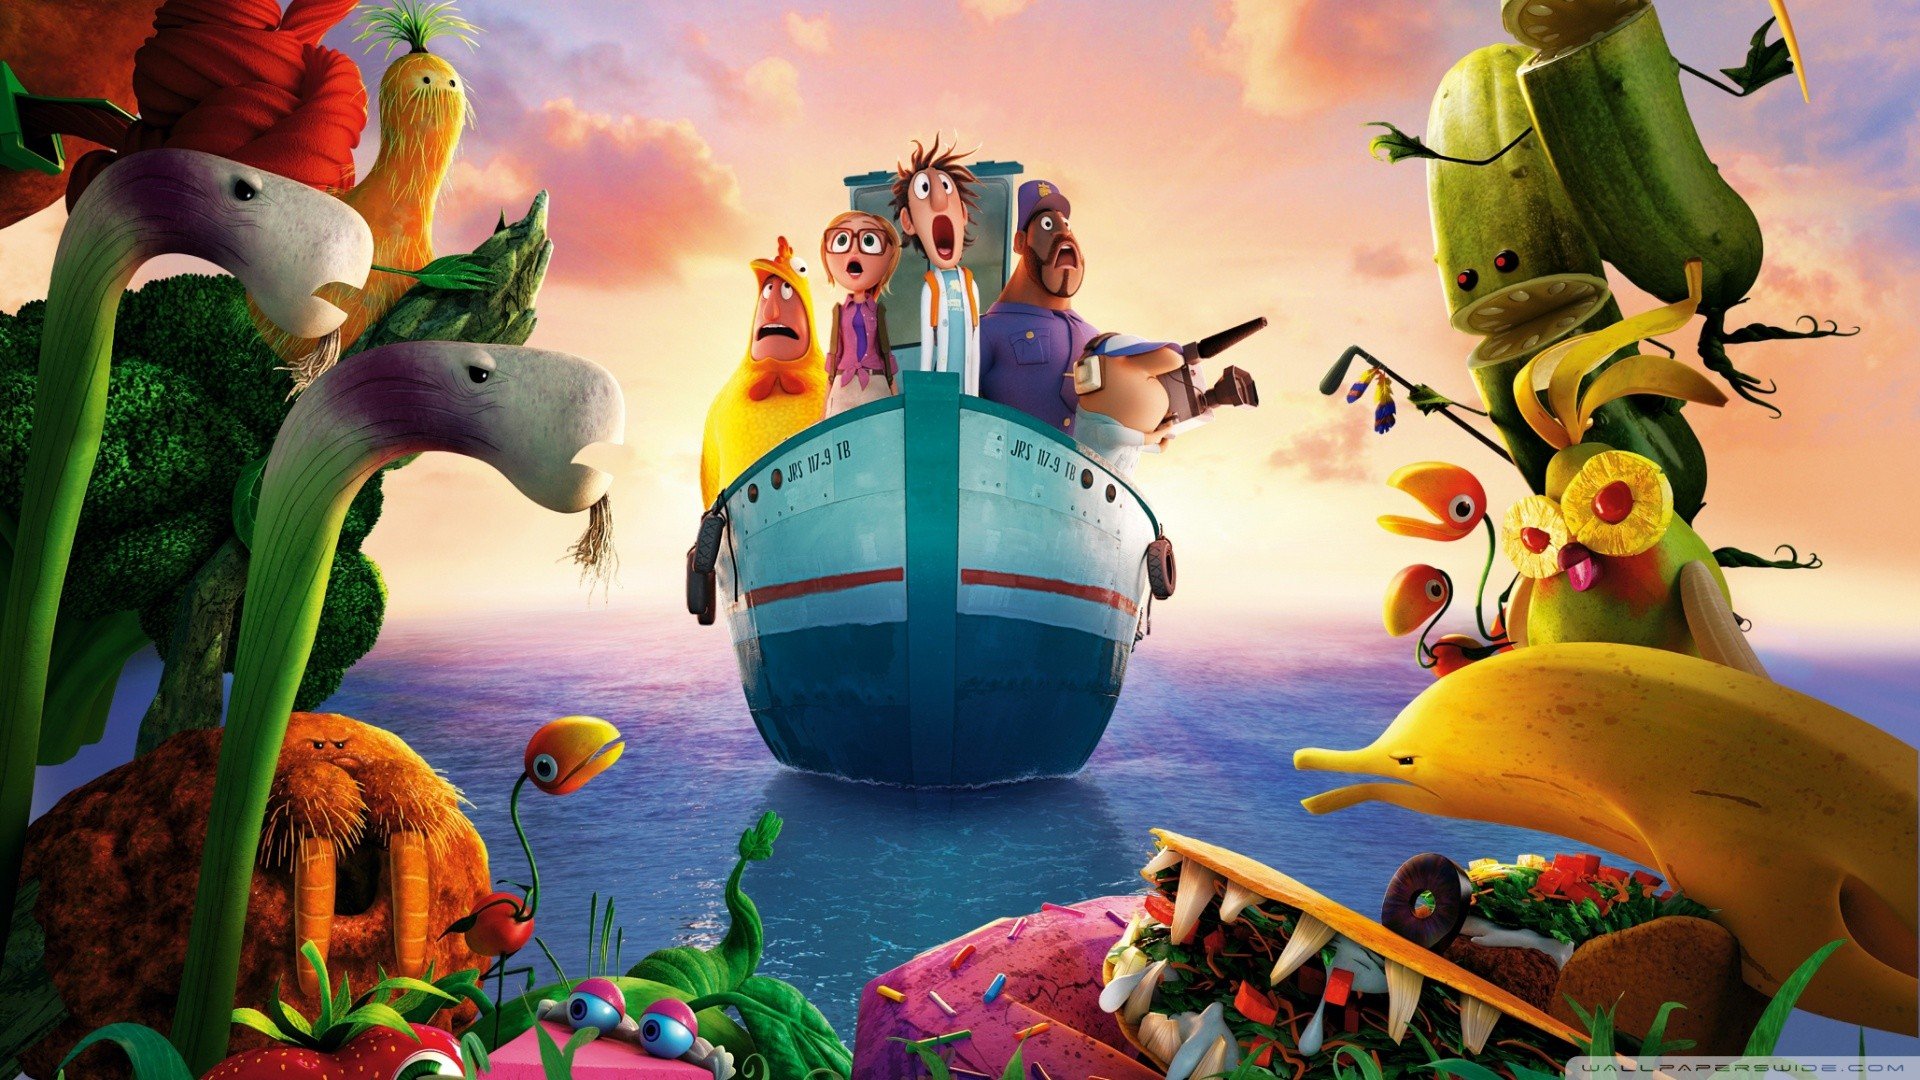 Cloudy with a Chance of Meatballs 2 Wallpaper